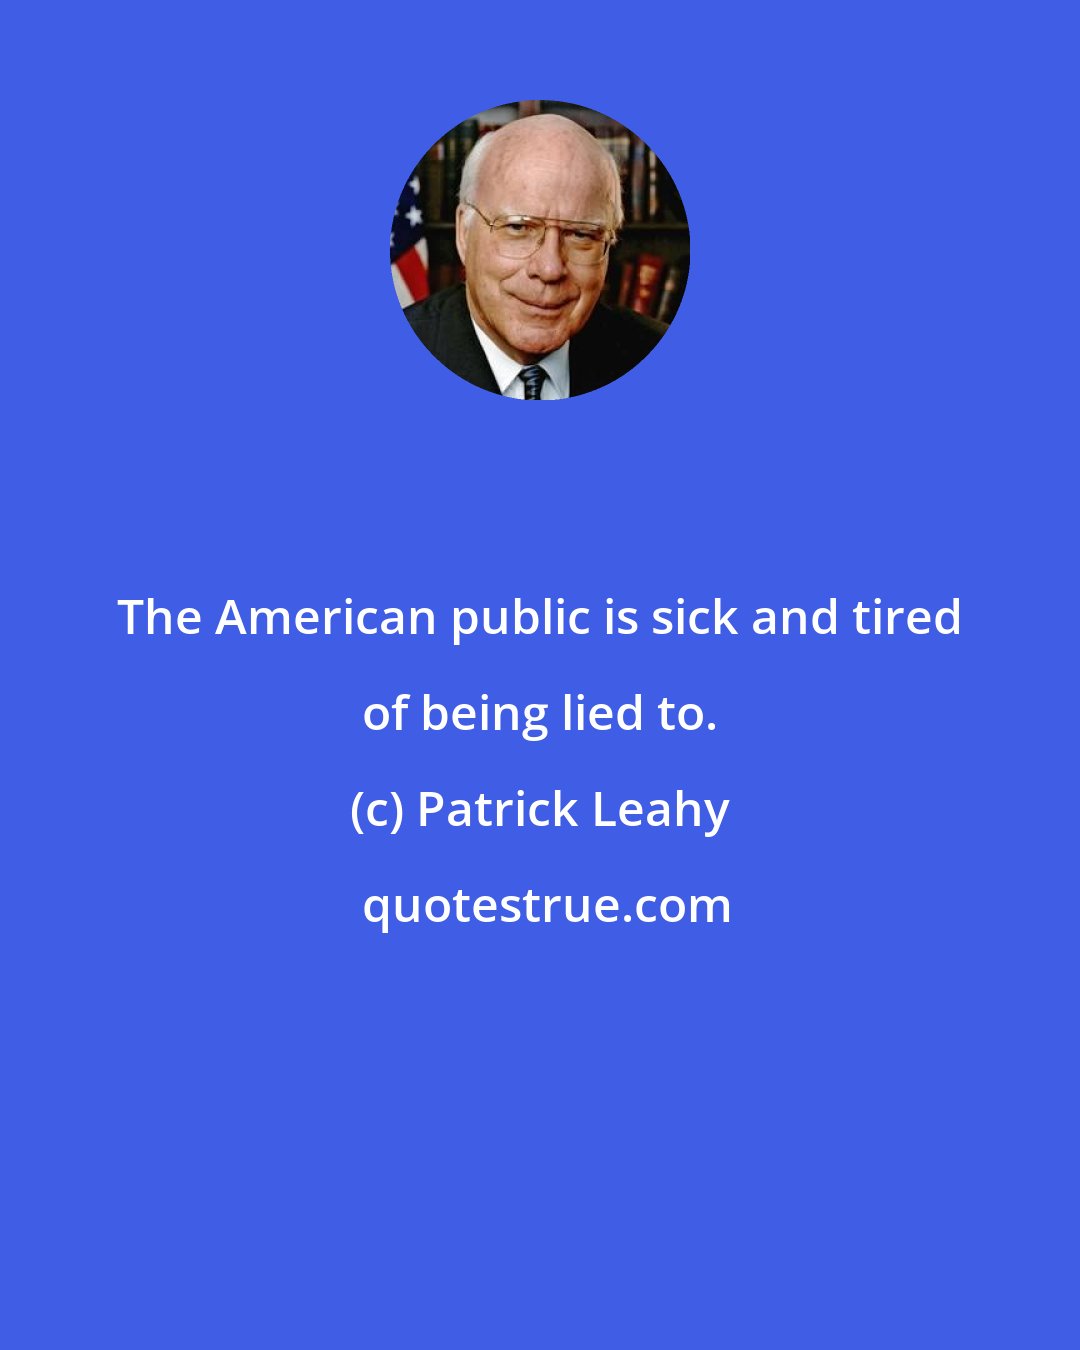 Patrick Leahy: The American public is sick and tired of being lied to.